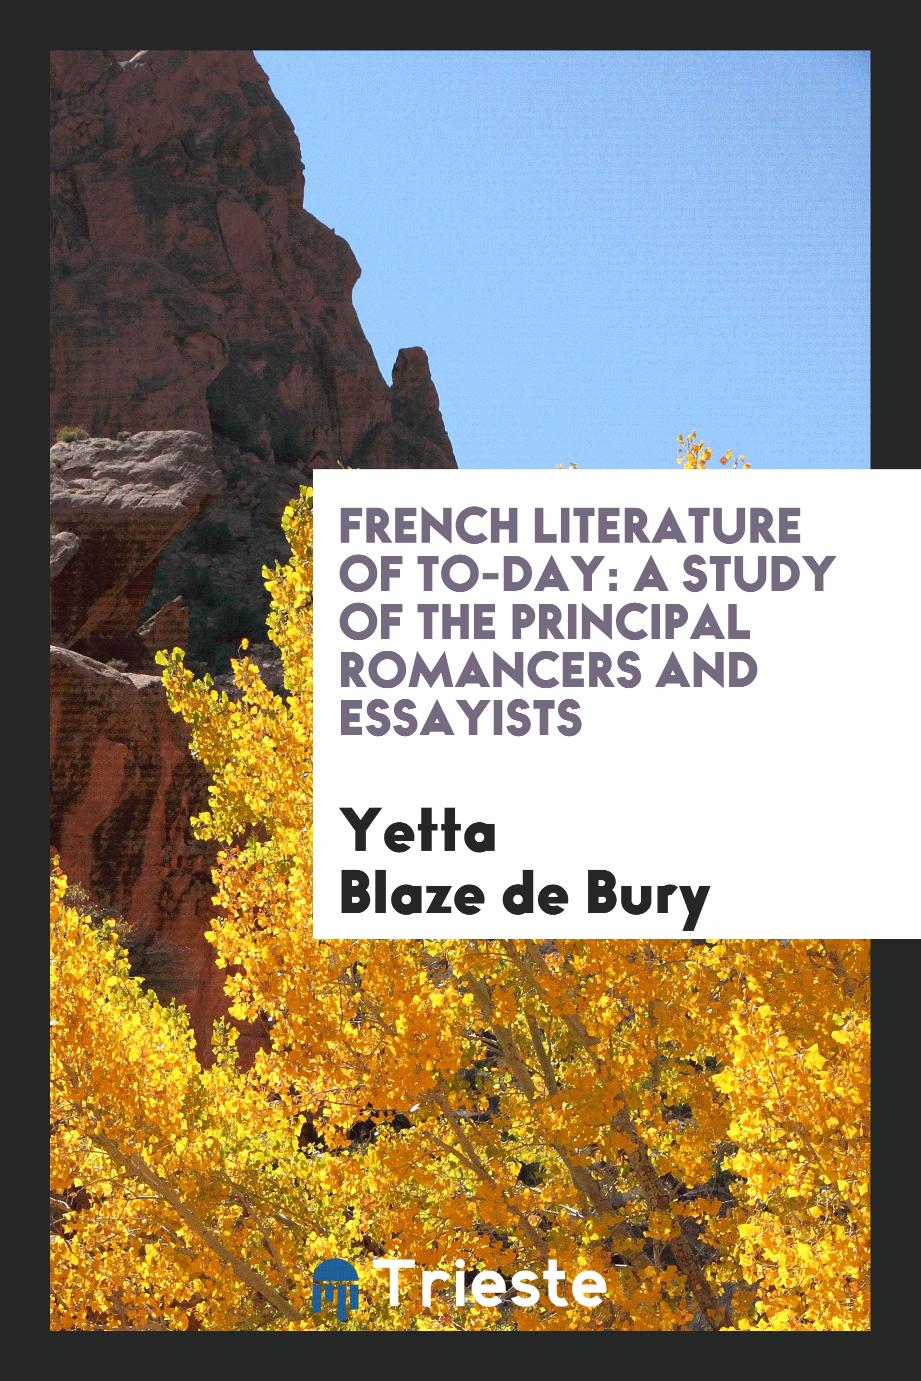 French literature of to-day: a study of the principal romancers and essayists